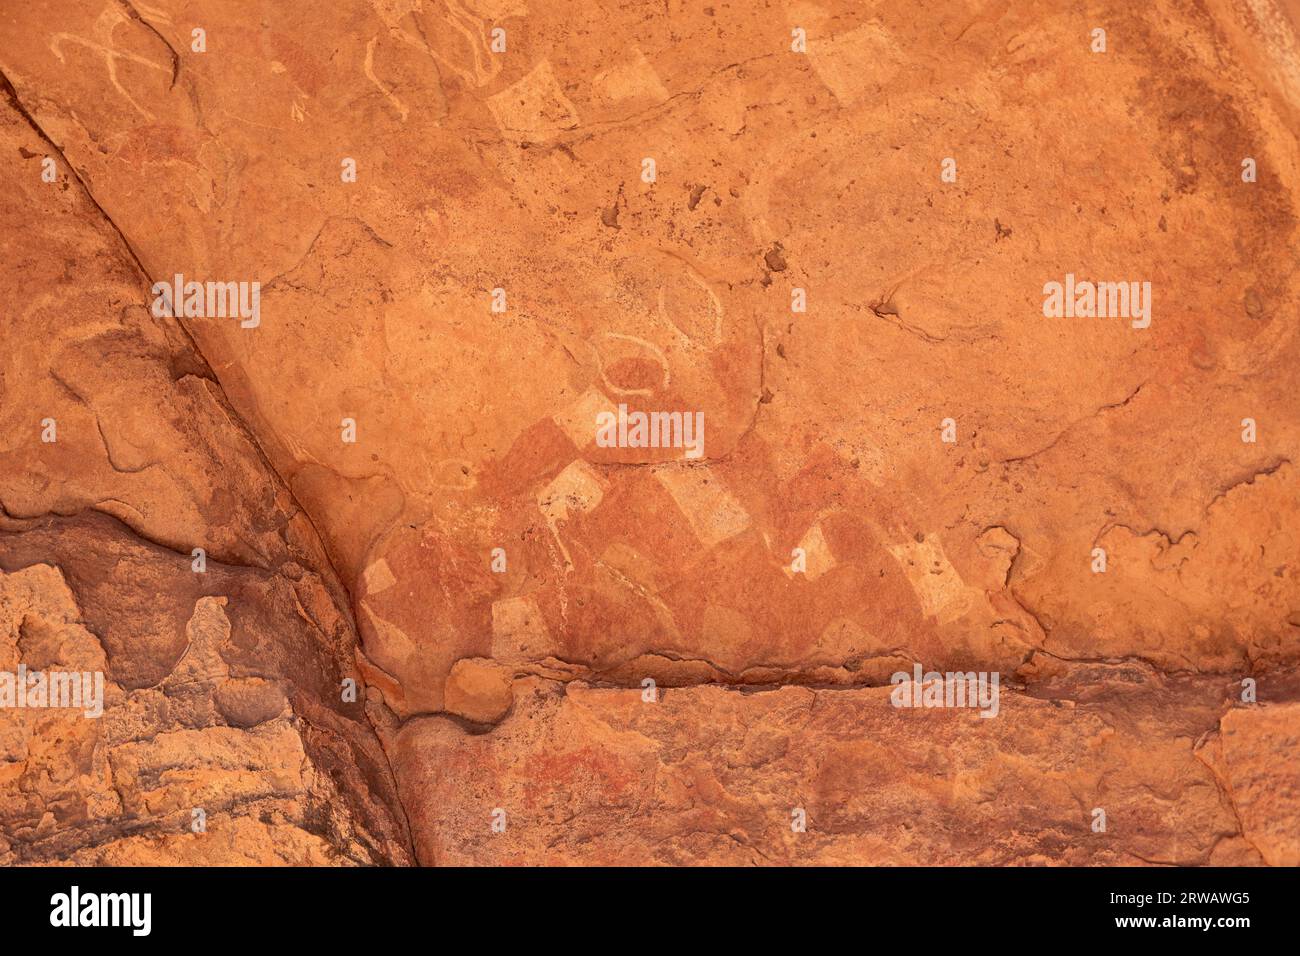 Cave painting in the Sahara desert Stock Photo